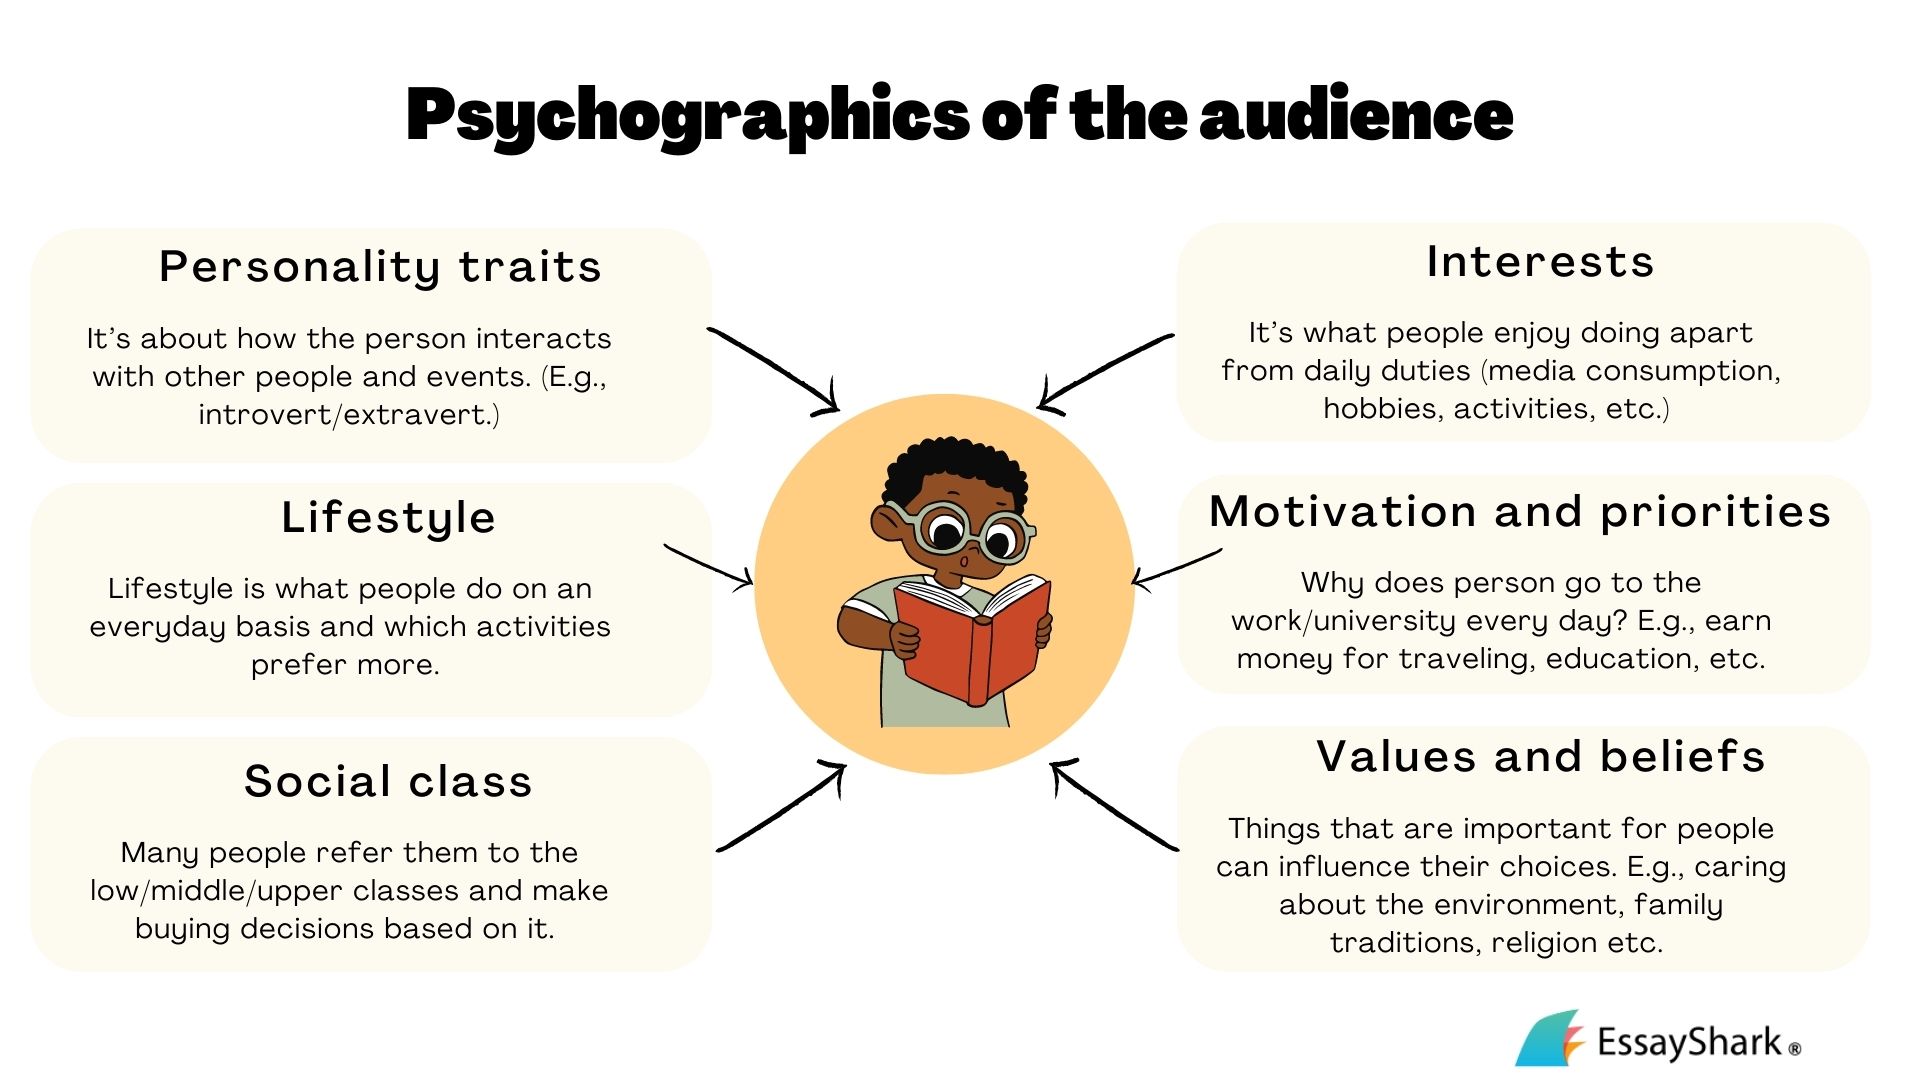 Psychographics of the audience